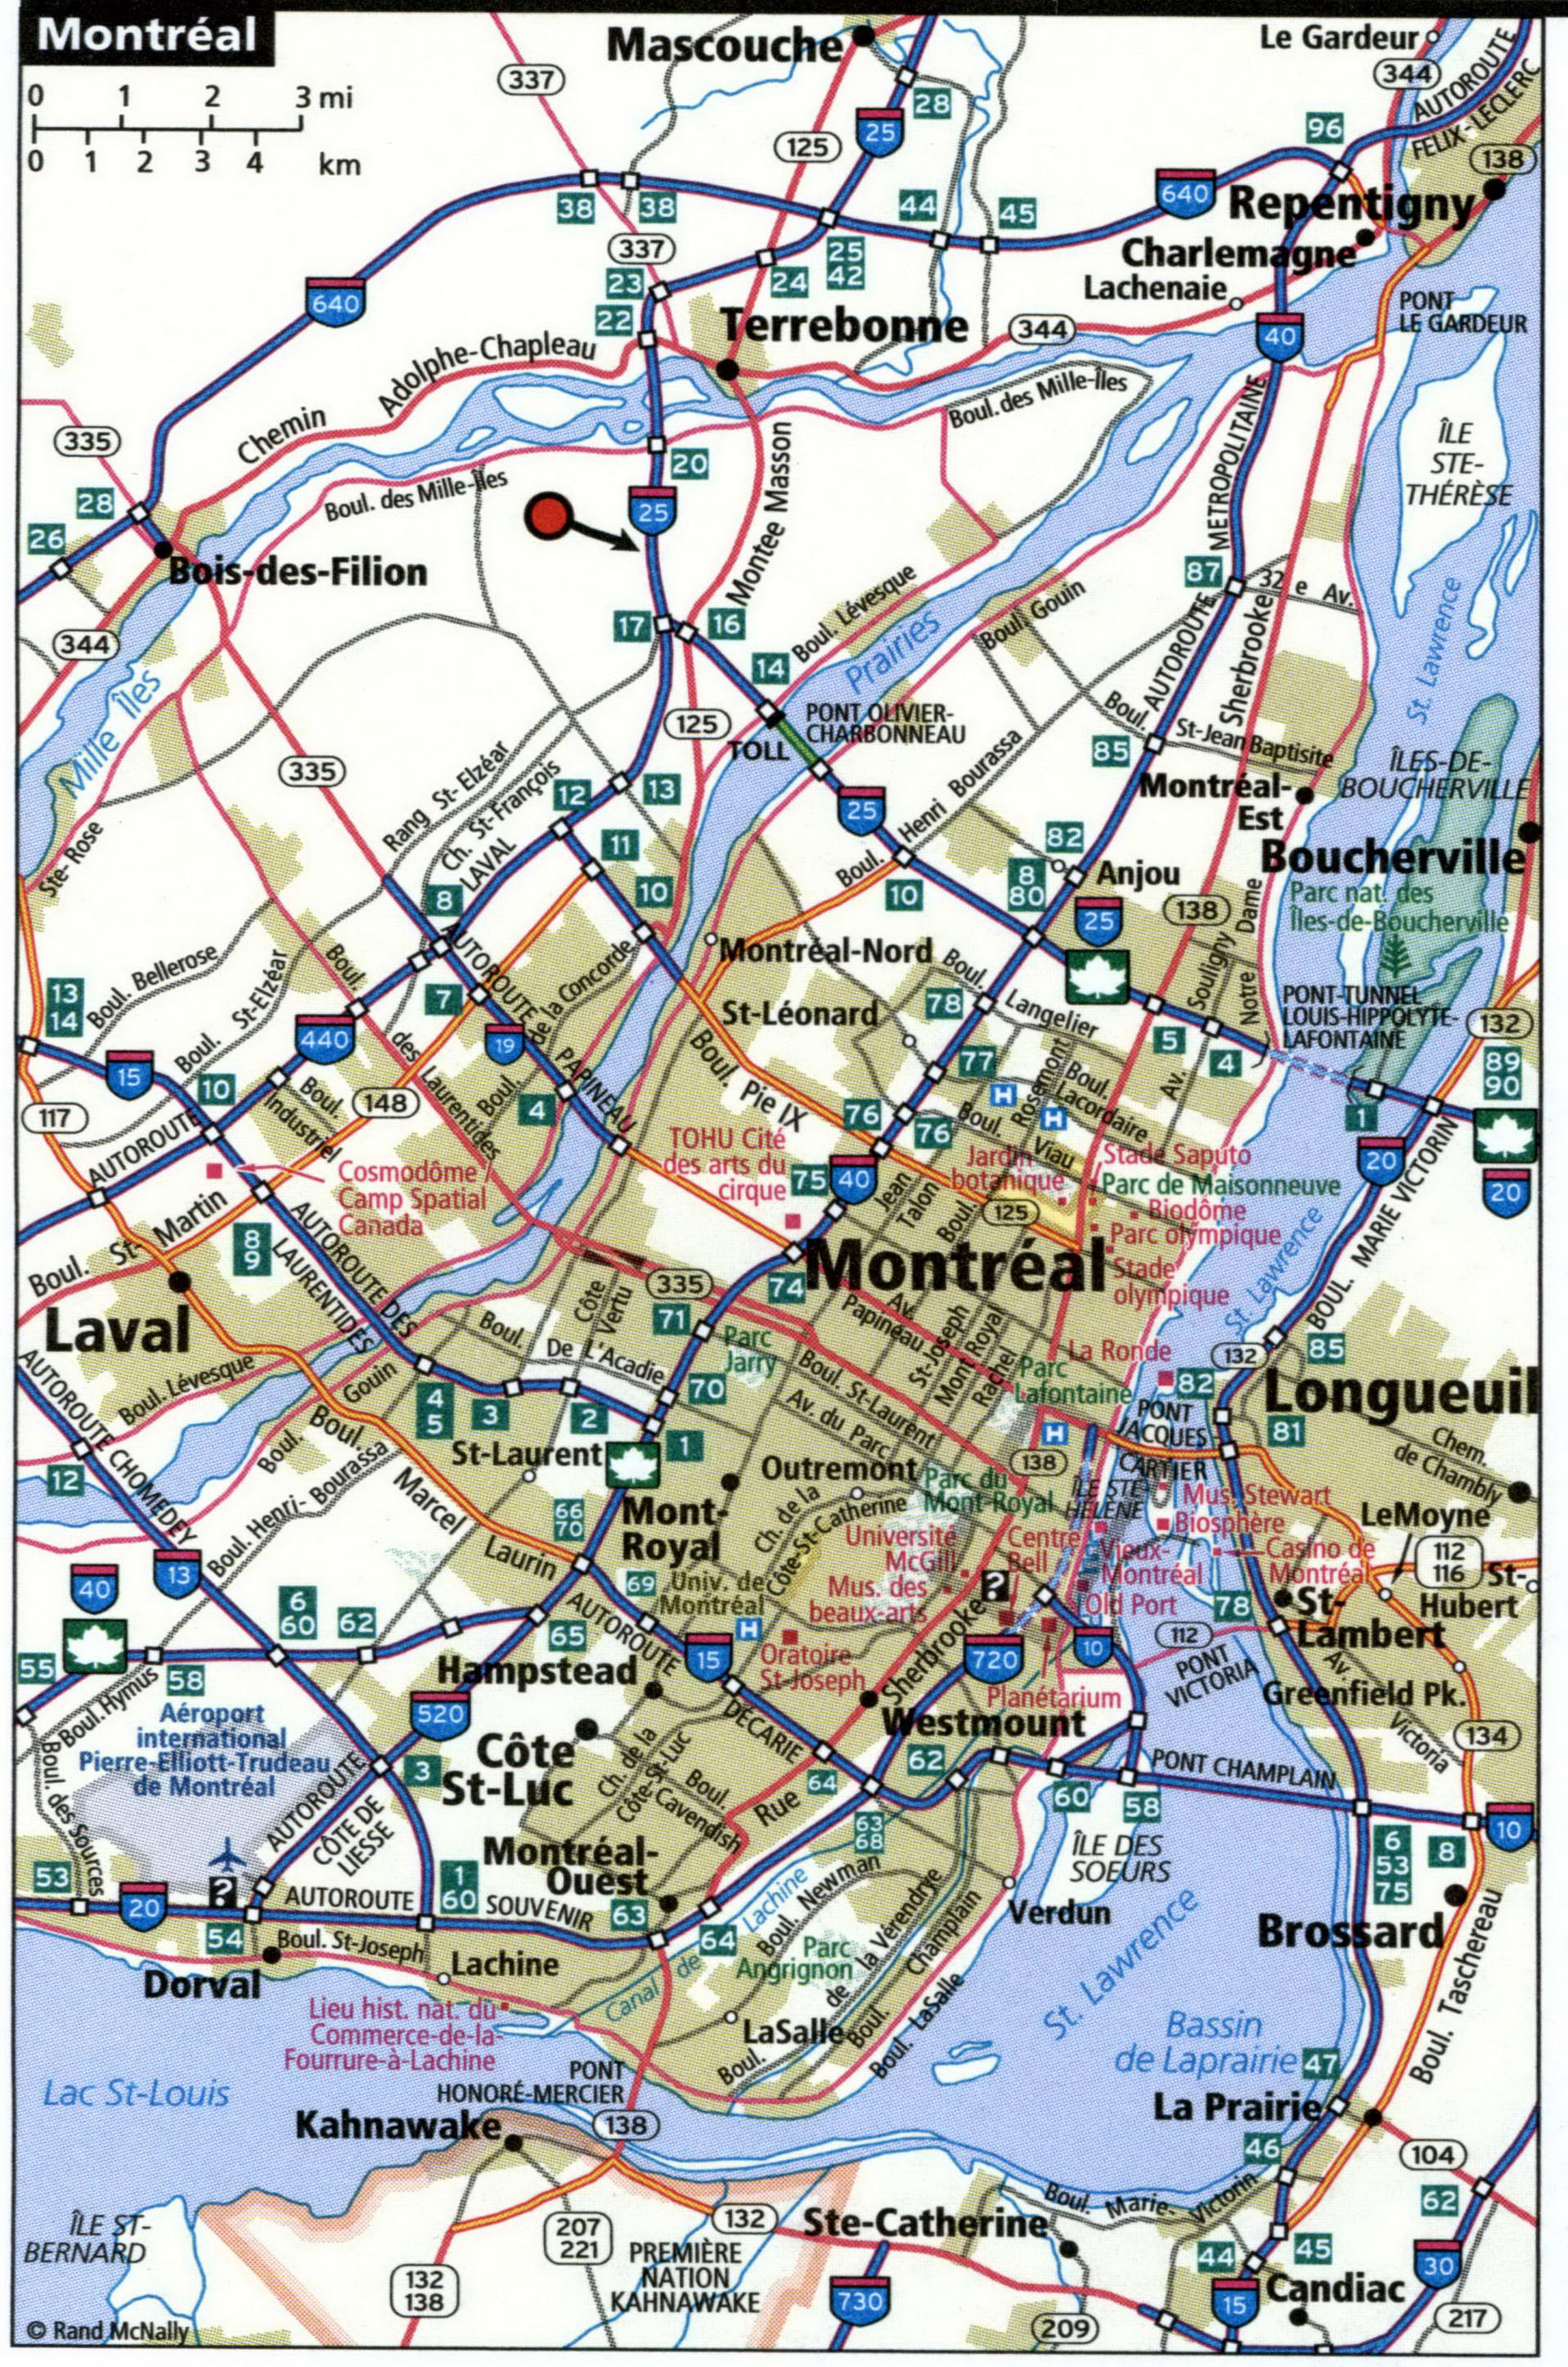 Montreal city road map for truckers